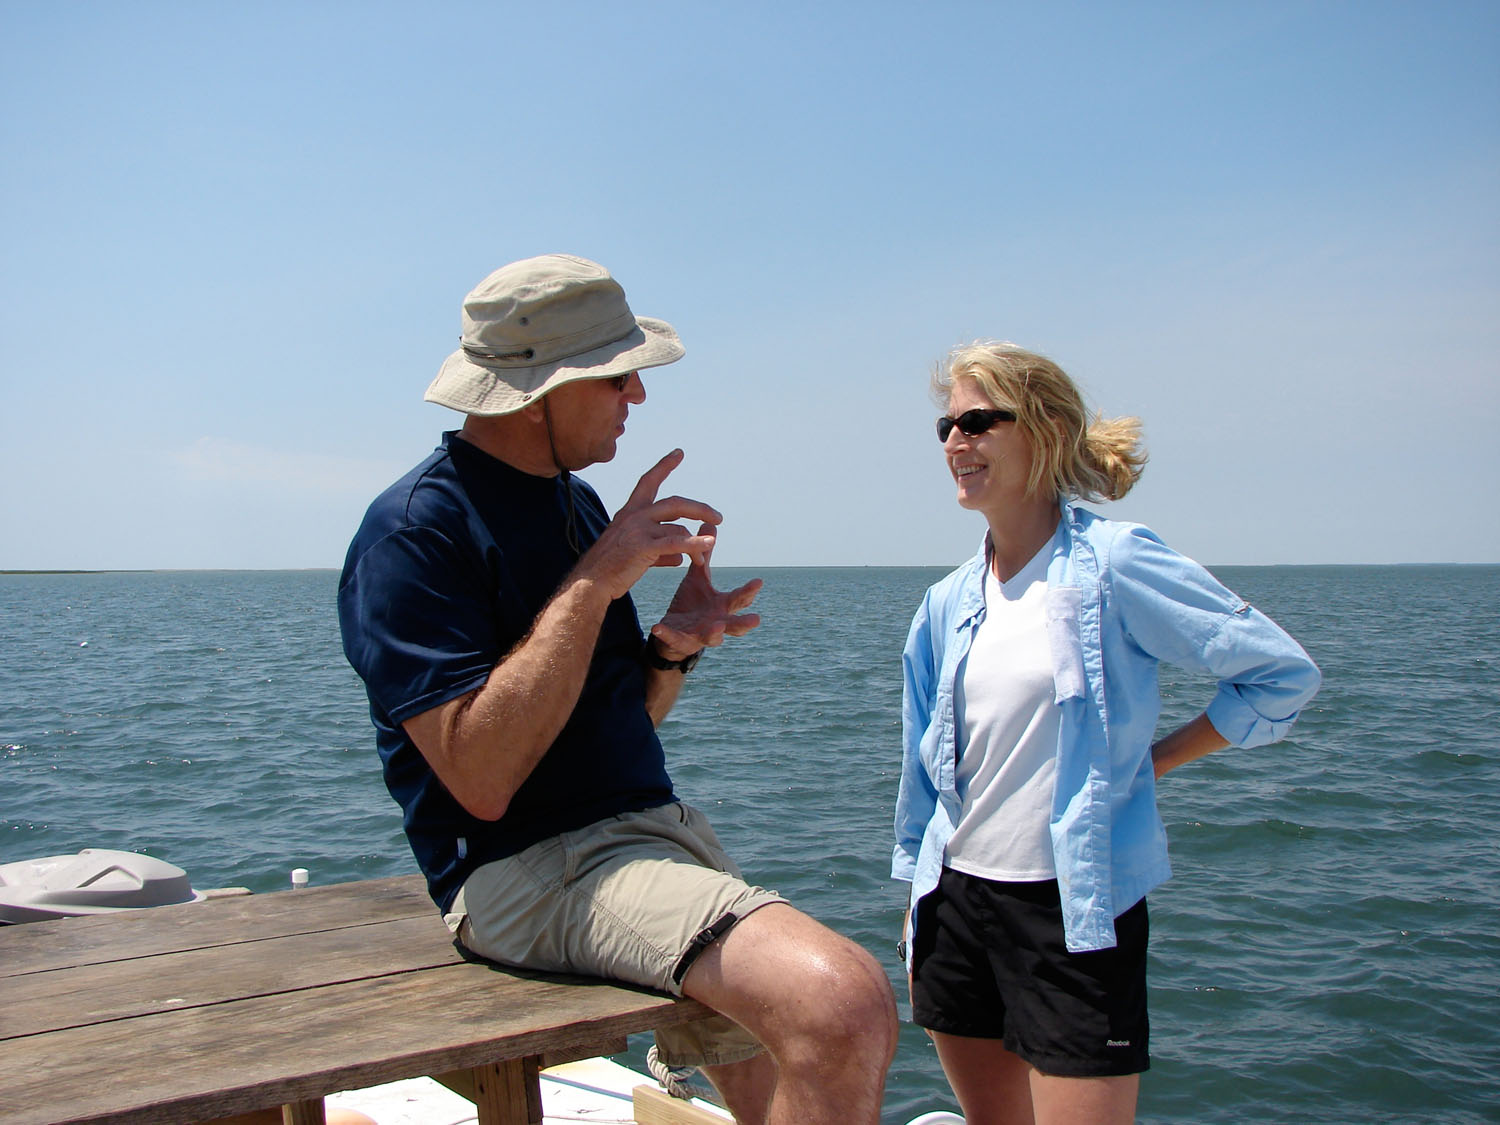 Karen McGlathery, right, talks to Bob Orth, left while standing on a pier at the ocean